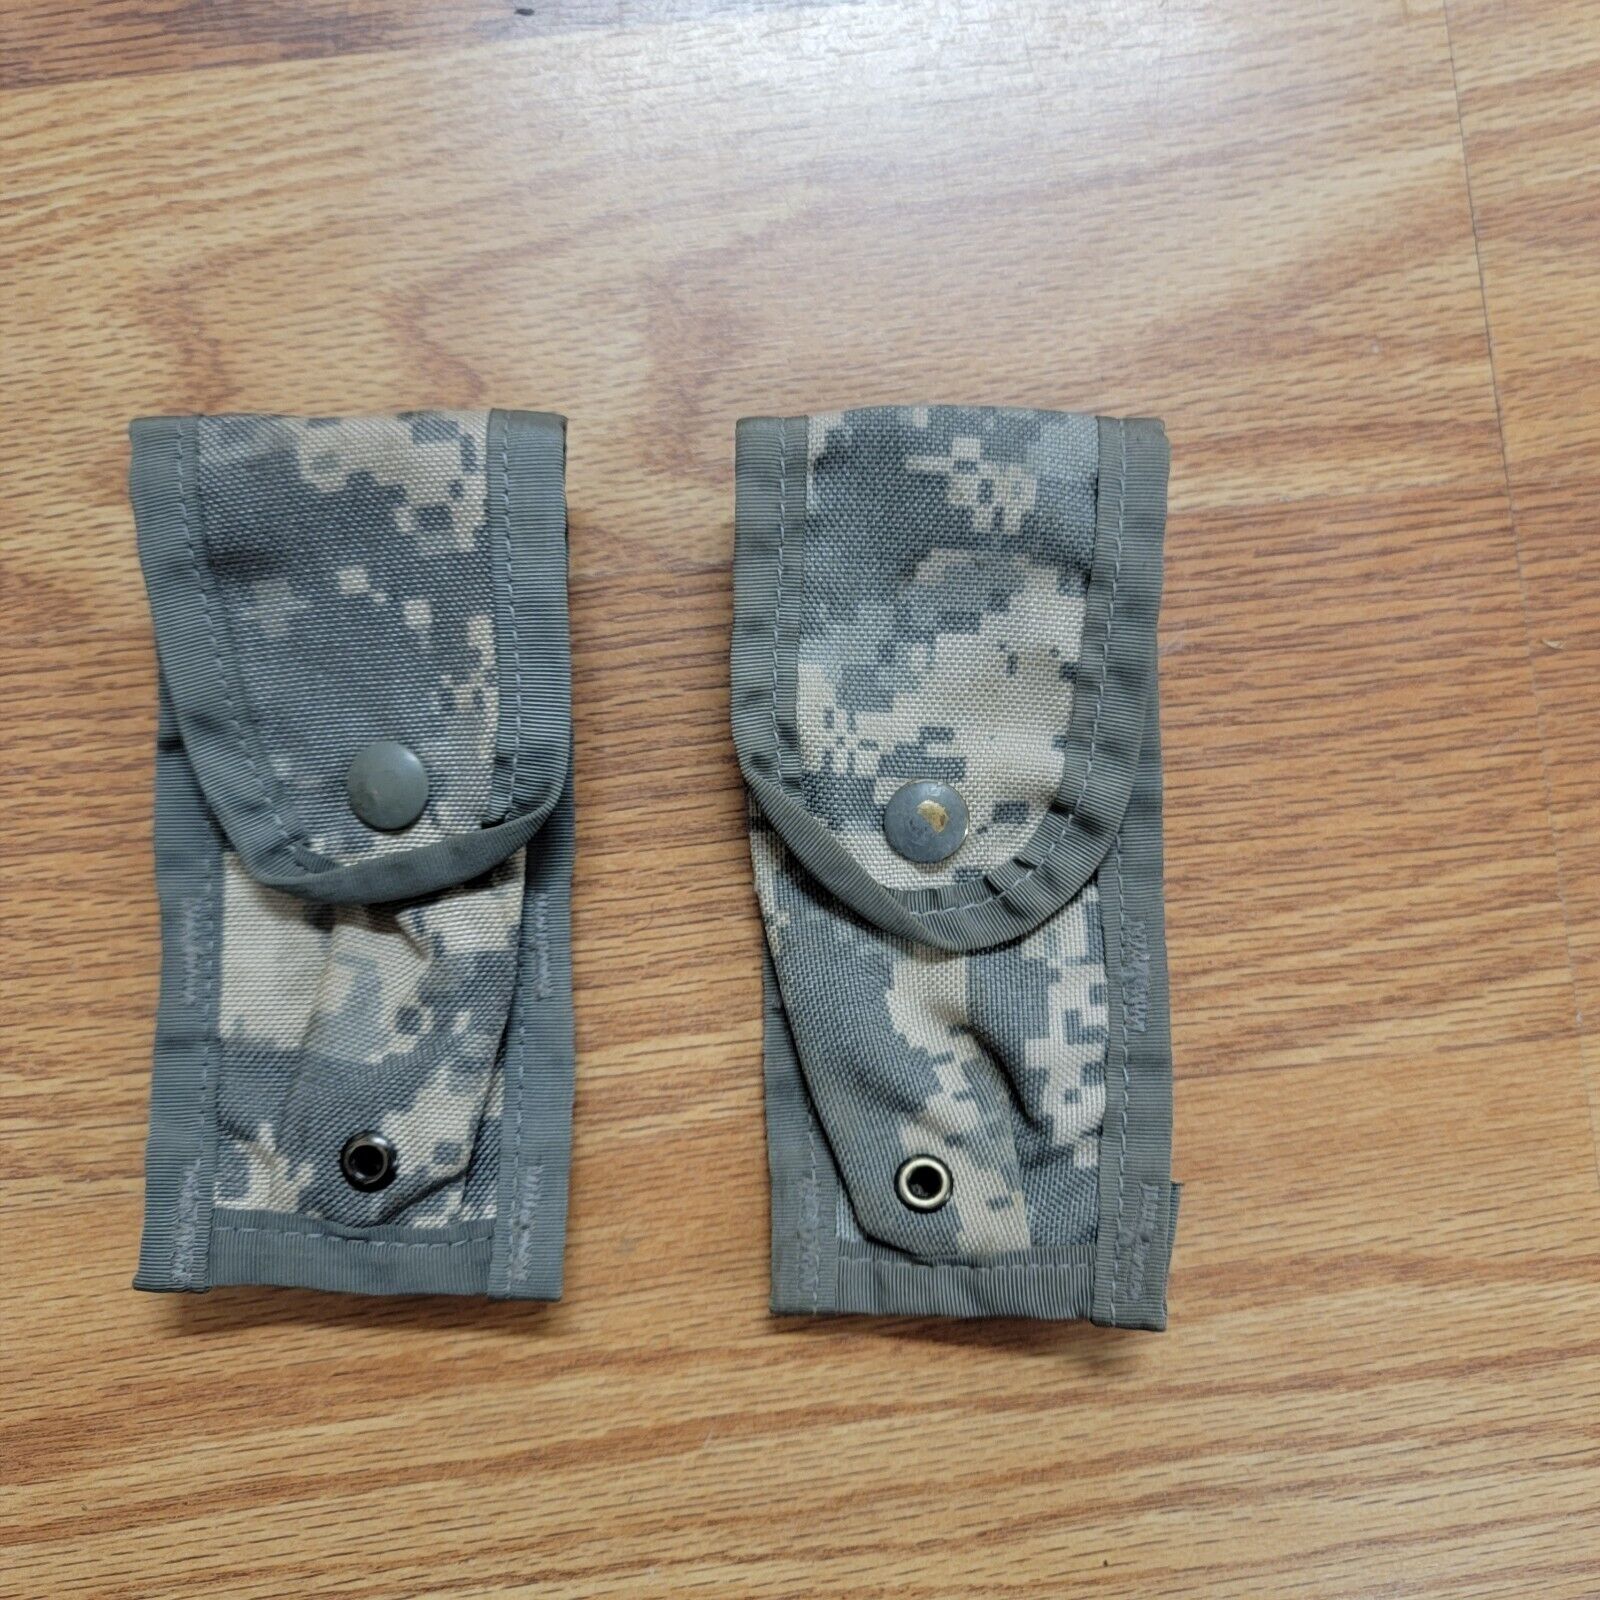 LOT OF 2 US GI Military MOLLE ACU 9mm Single Mag Pistol Magazine Pouches Sig